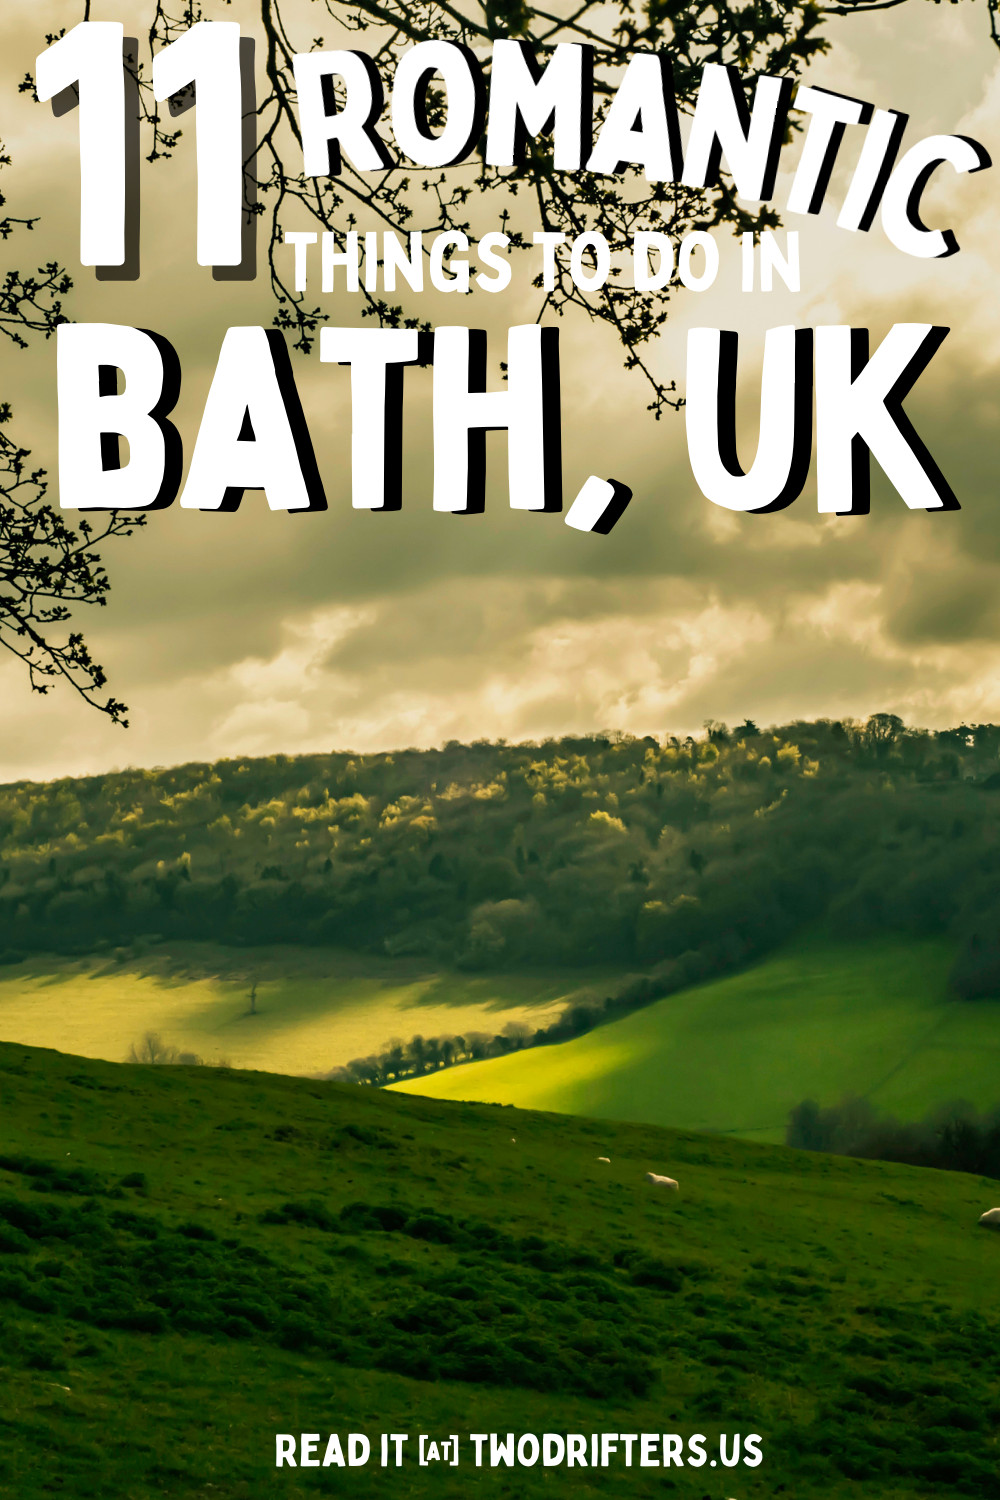 Pinterest social share image that says "10 Romantic Things to do in Bath, UK."